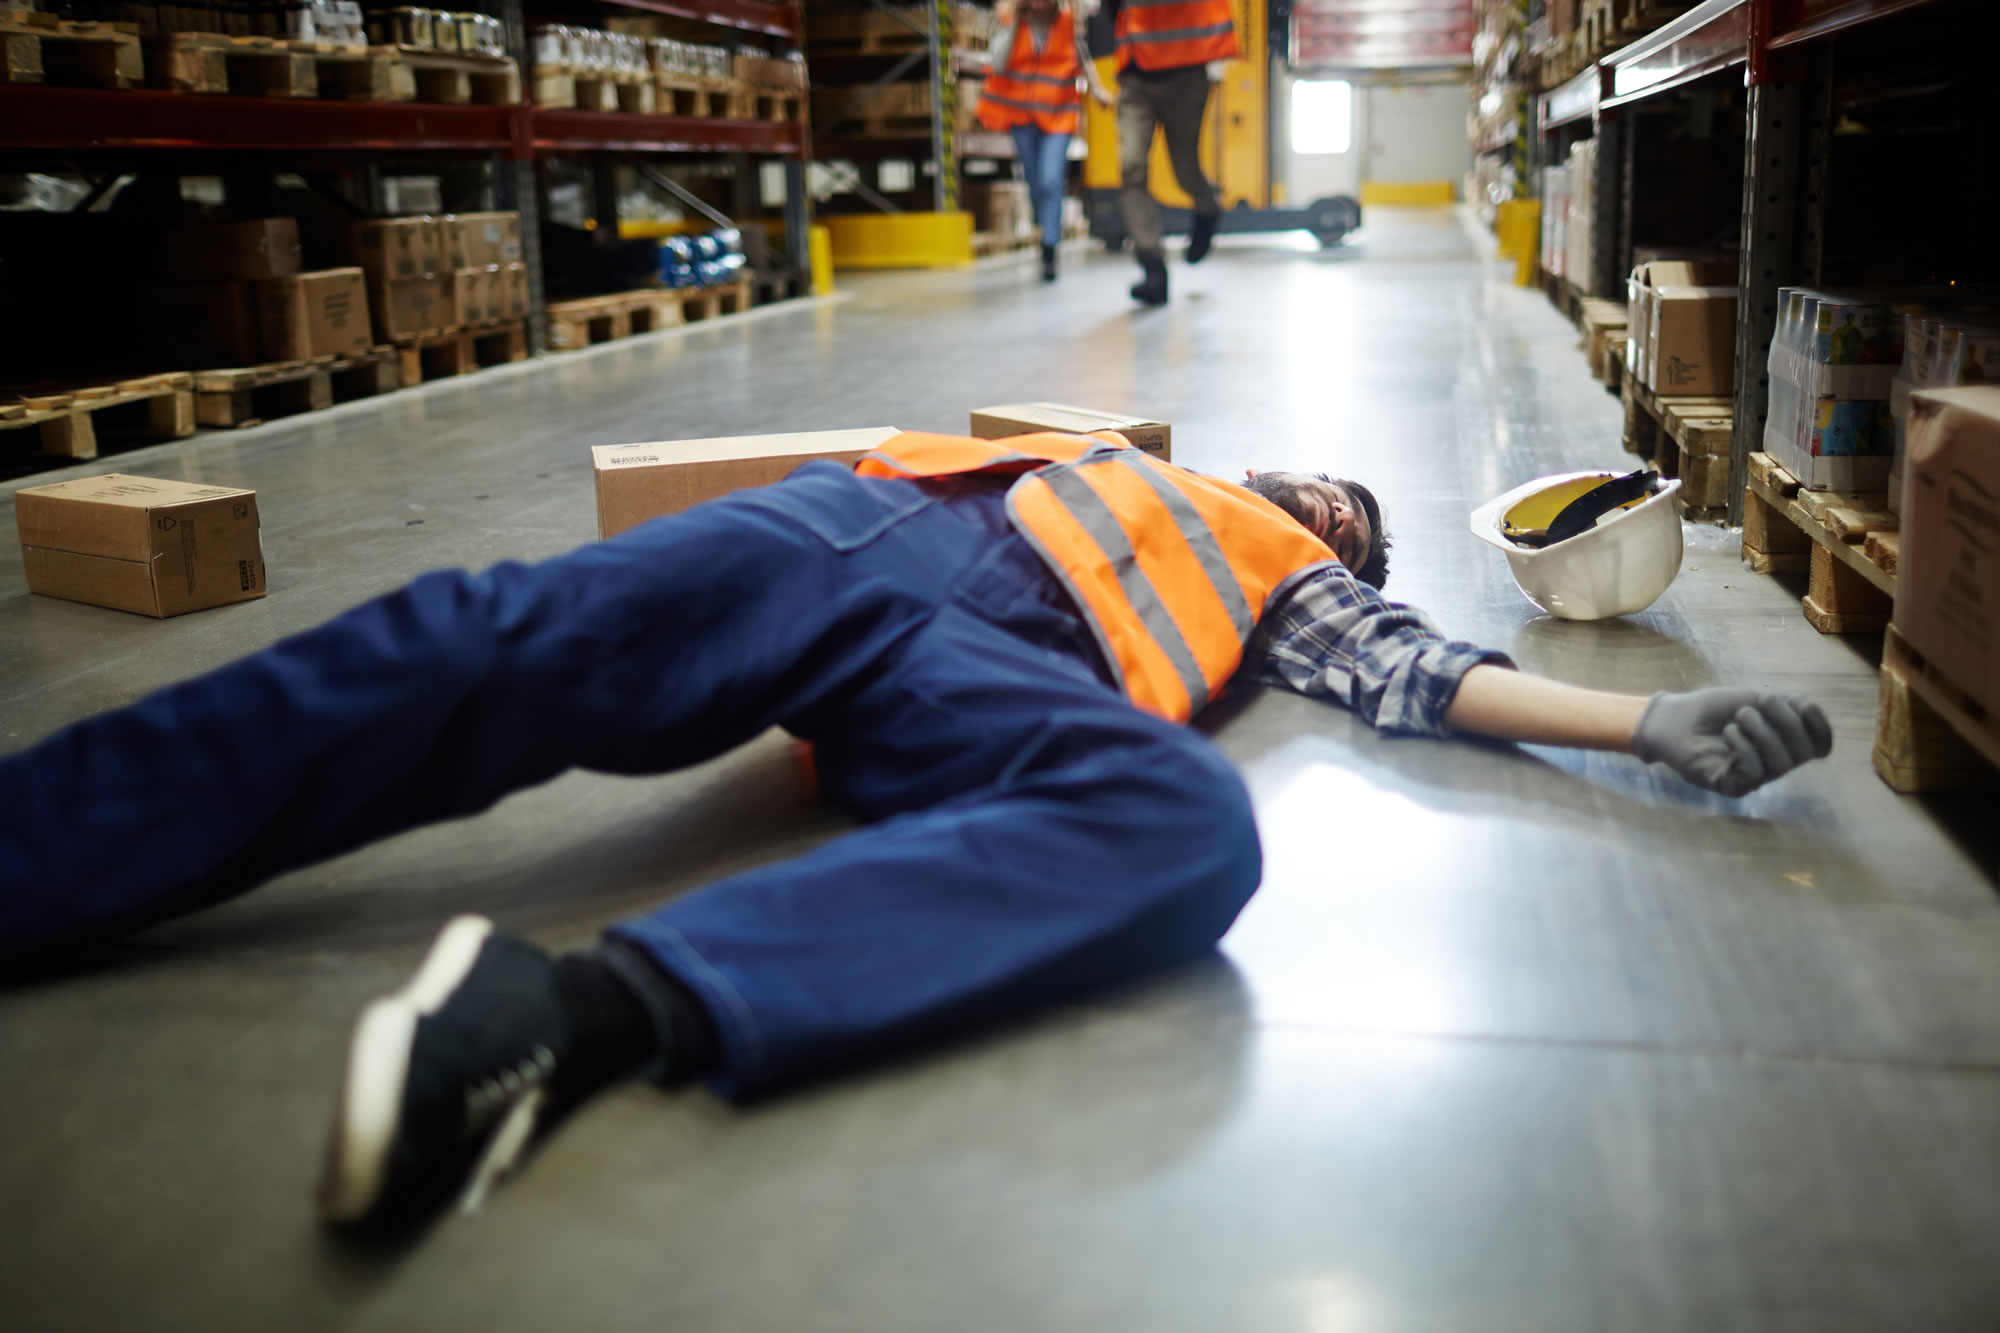 Workplace Slip, Trip or Fall - slip and trip hazards in the workplace, suing employer for negligence solicitors Leeds